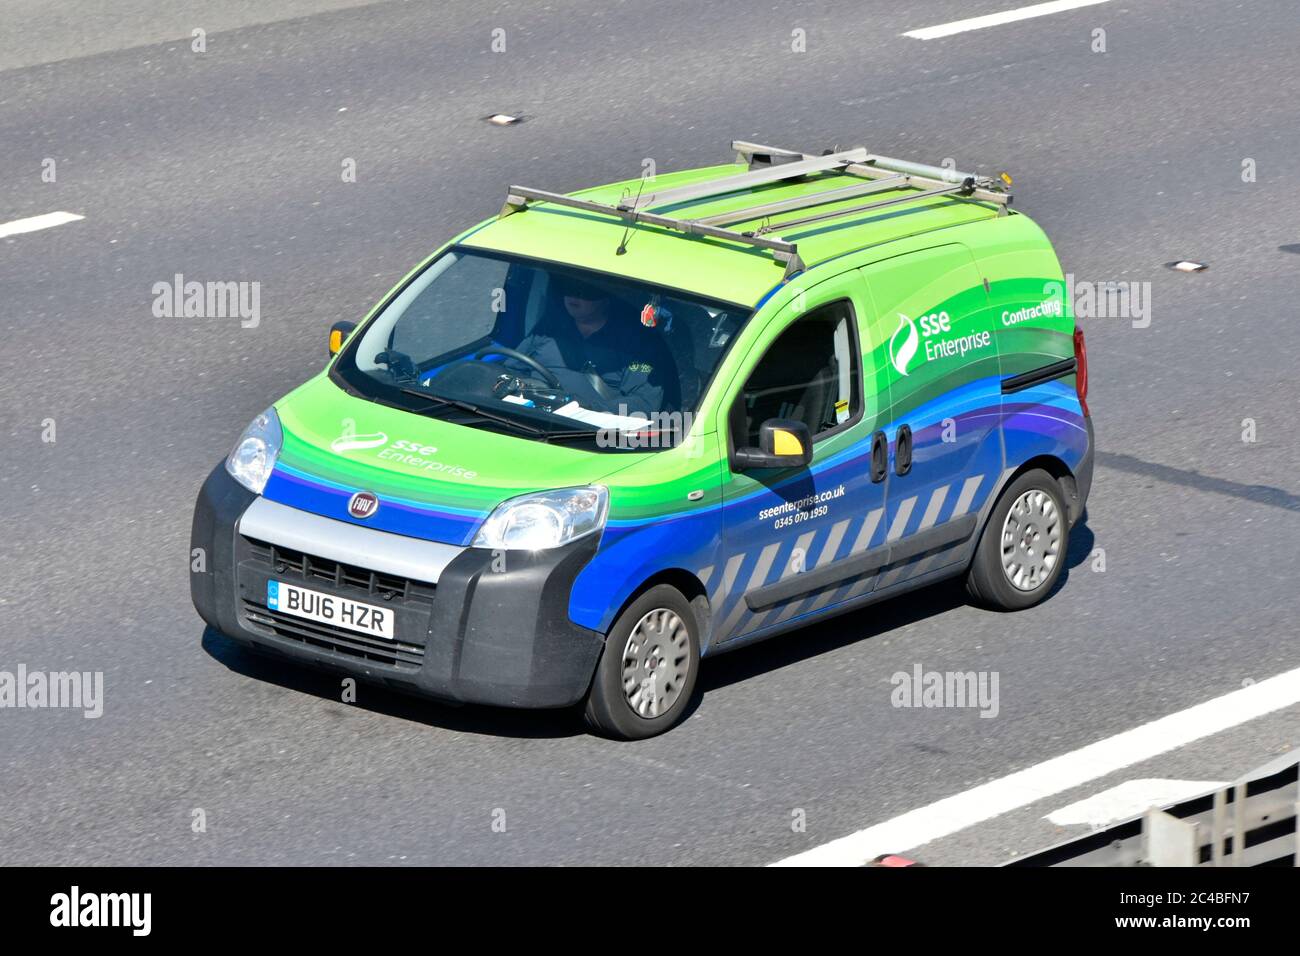 Aerial side & front view of SSE plc energy company Enterprise subsidiary contracting business Fiat van and driver fitted with roof rack UK motorway Stock Photo